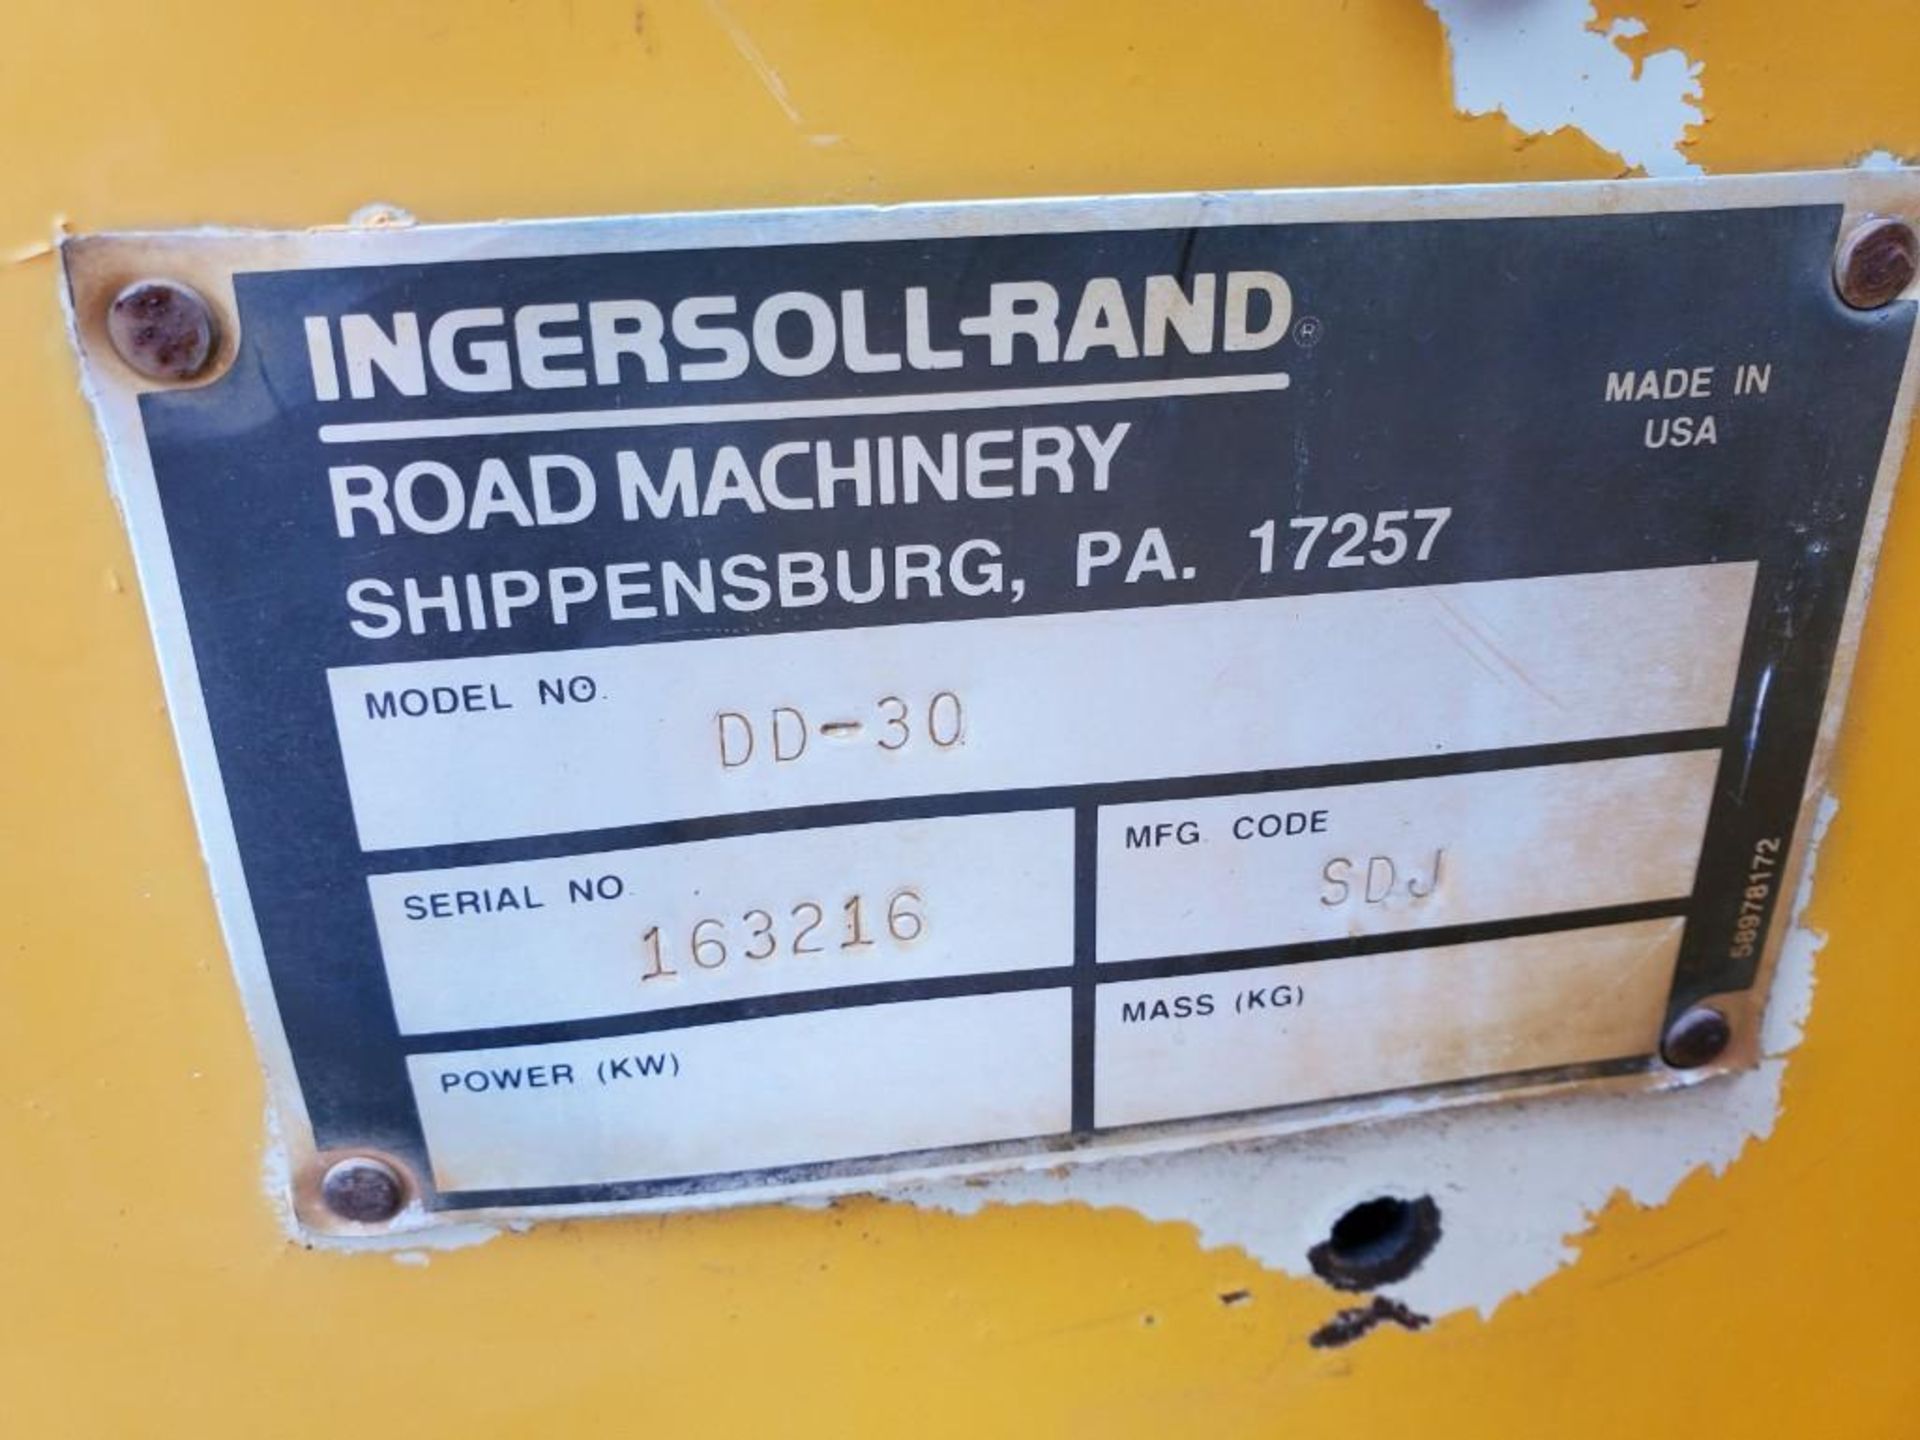 2000 INGERSOLL-RAND DD30 VIBRATING ROLLER, S/N 163216, 6,603 HOURS, OPEN ROPS, 54" WIDE DRUMS, 39.24 - Image 23 of 25